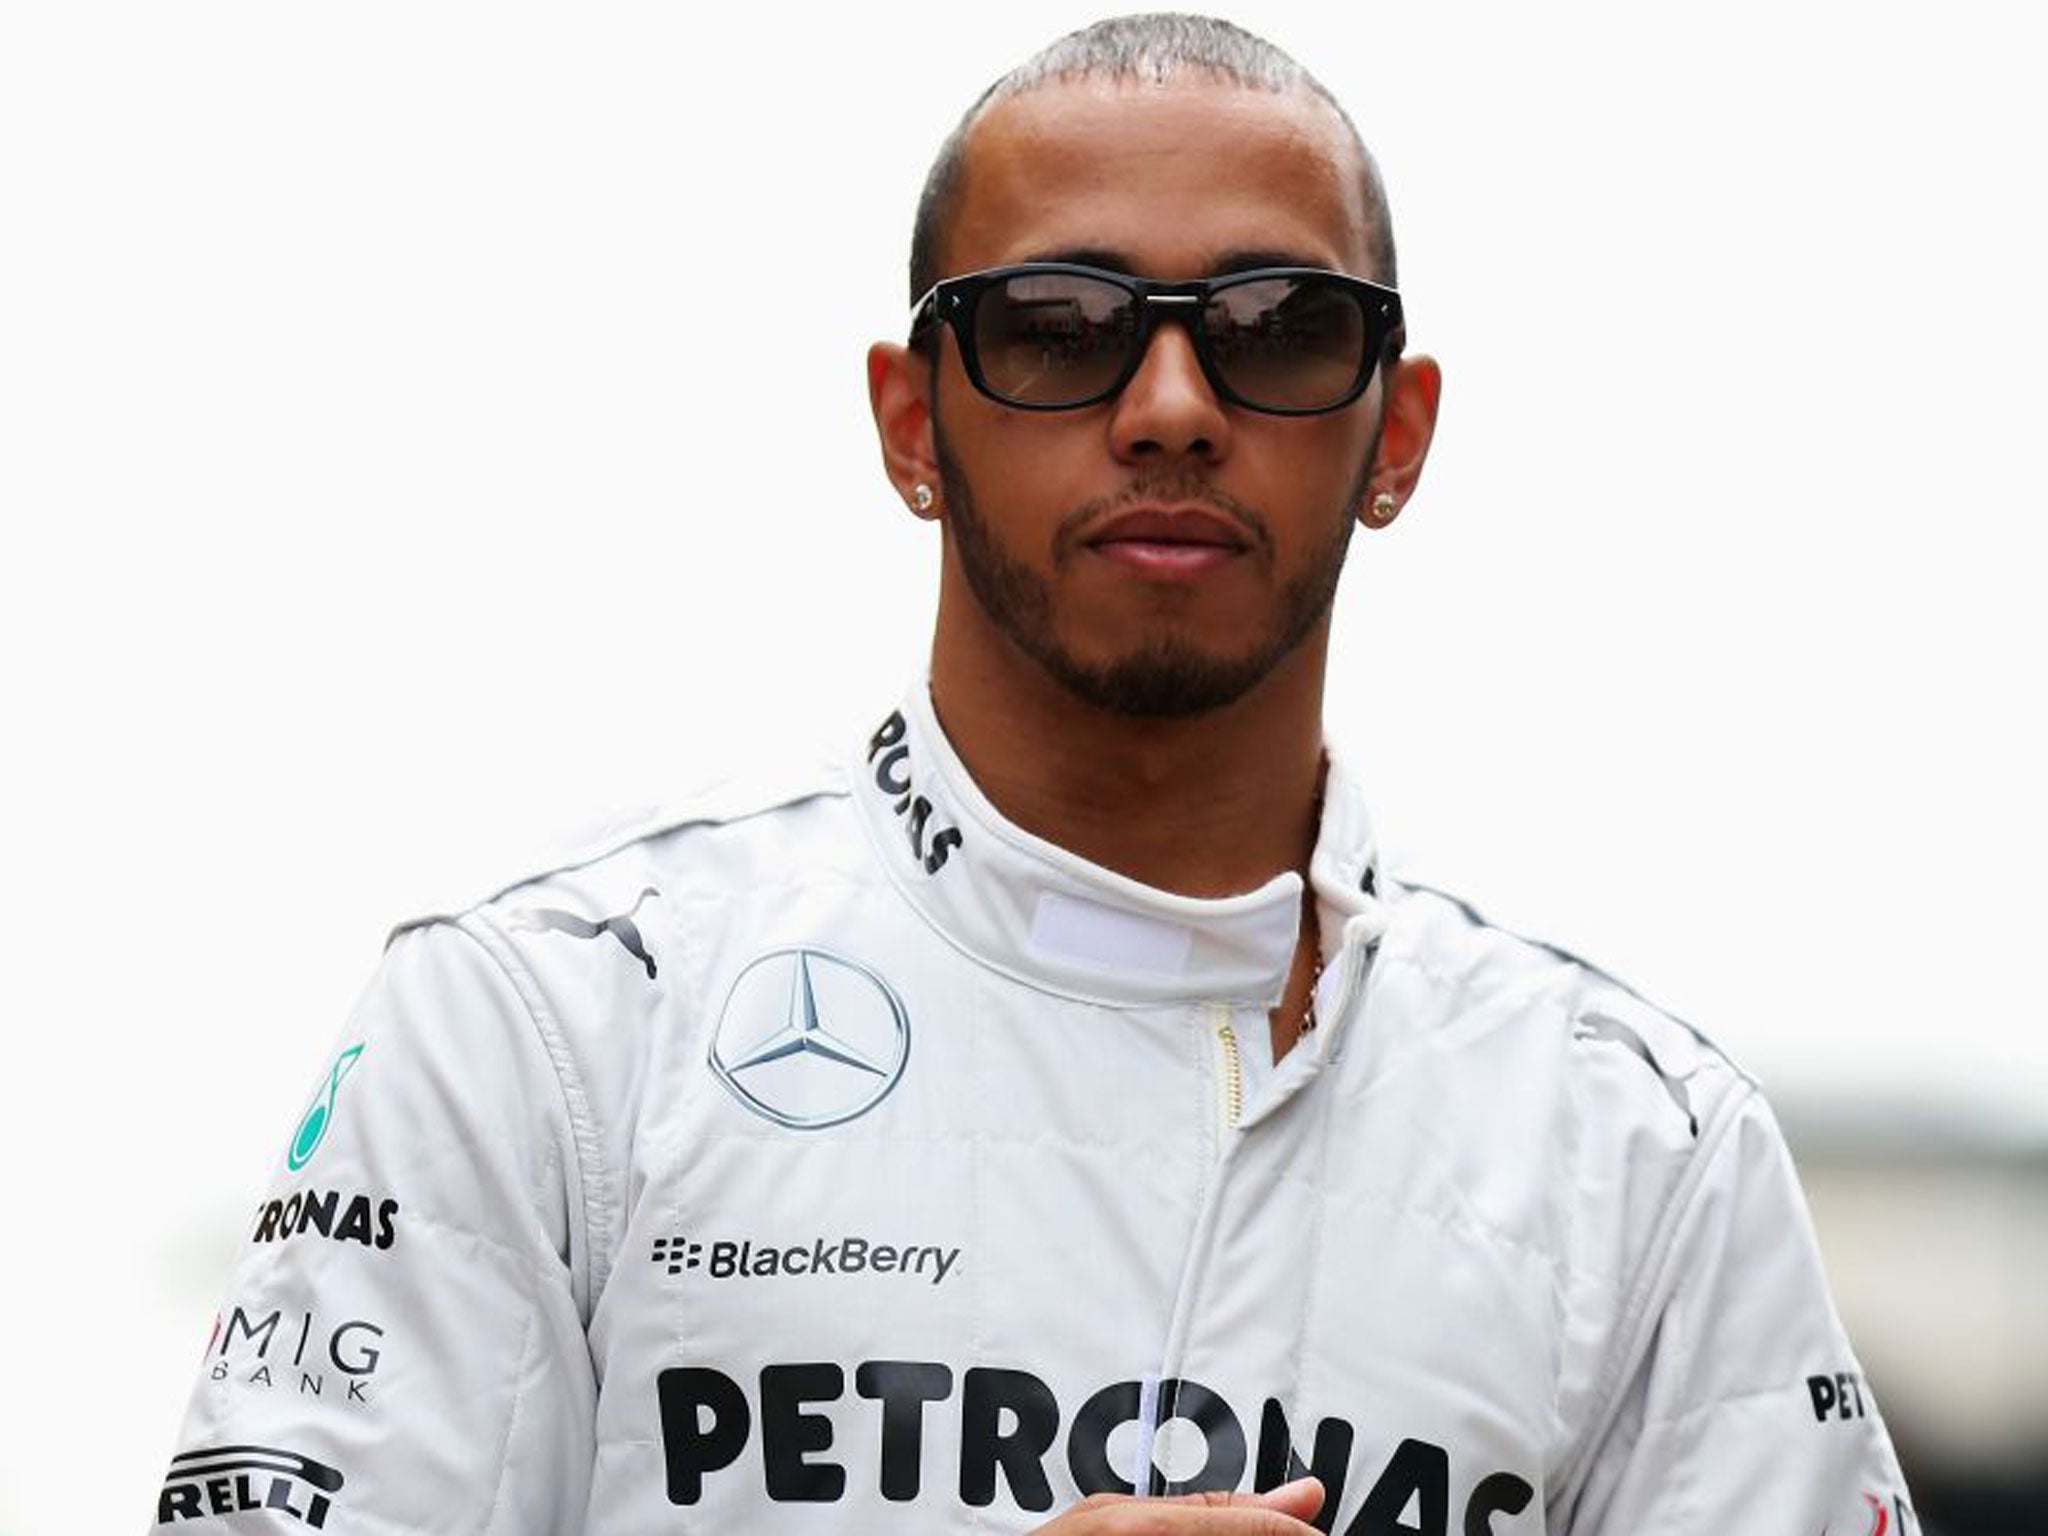 Lewis Hamilton went fastest in first practice but fell away later